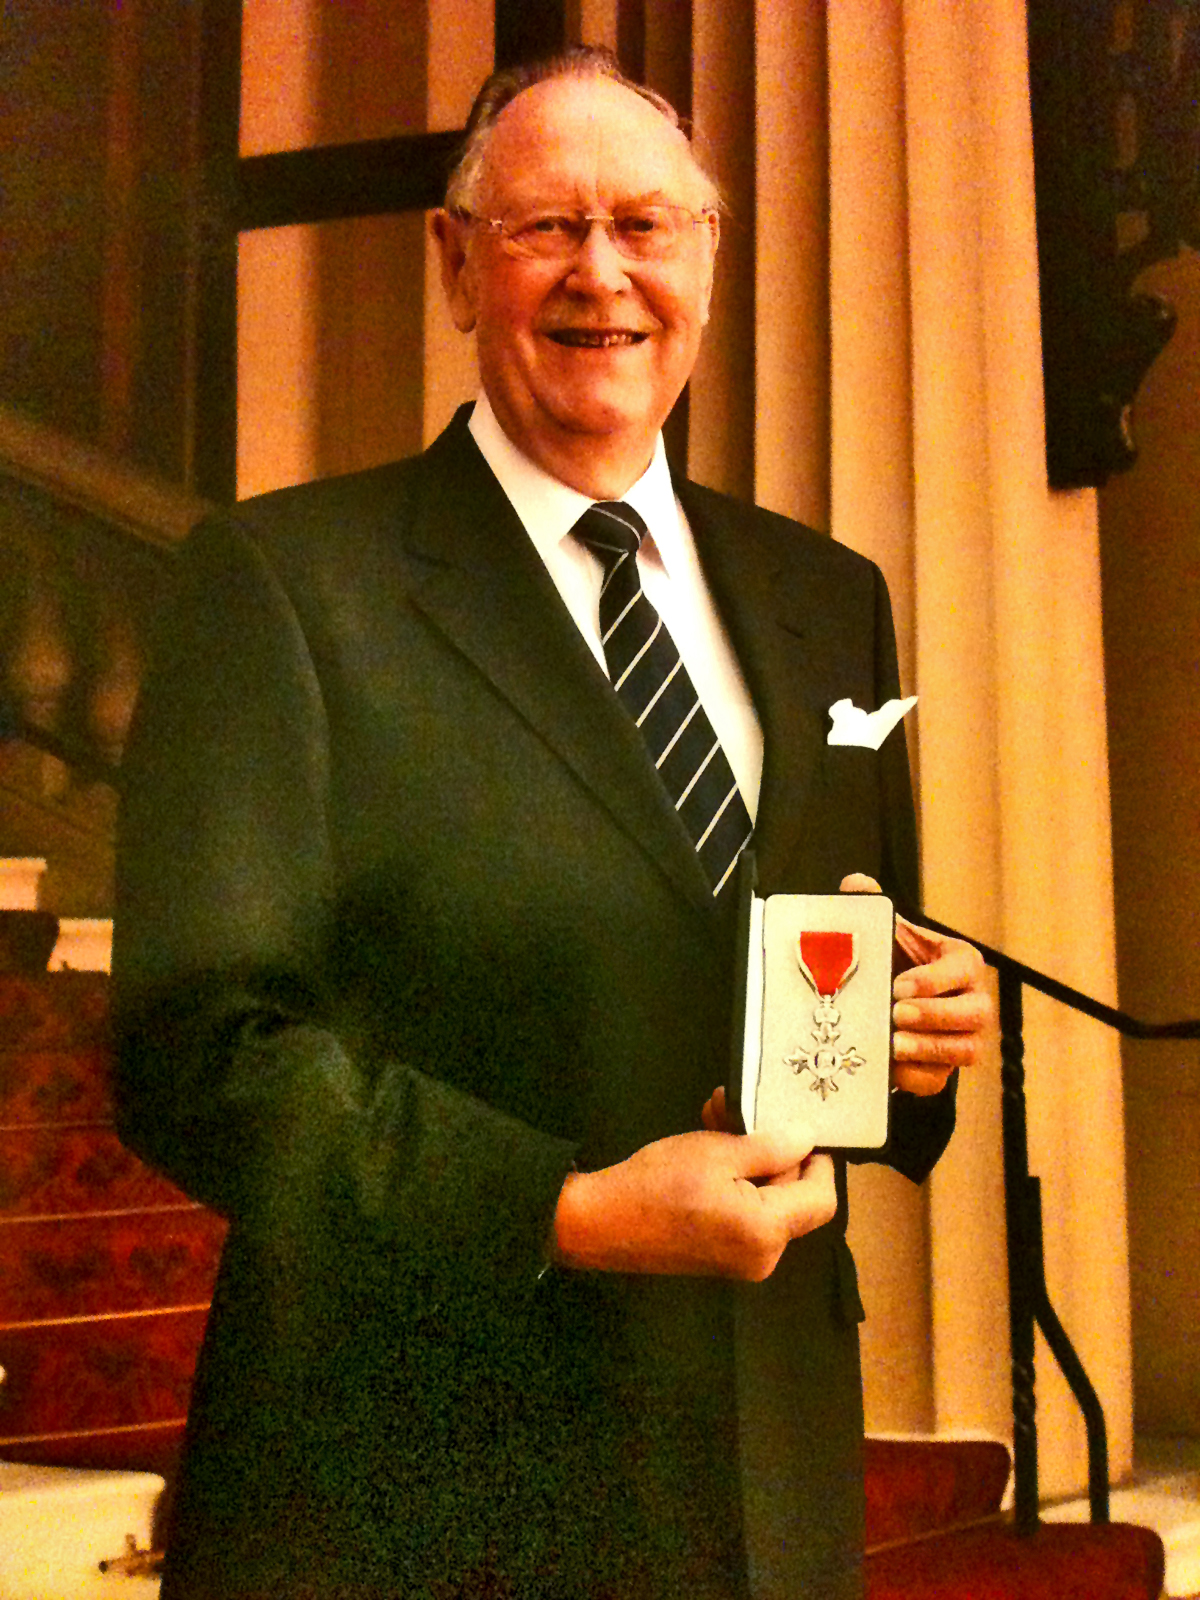 Brian Taylor MBE